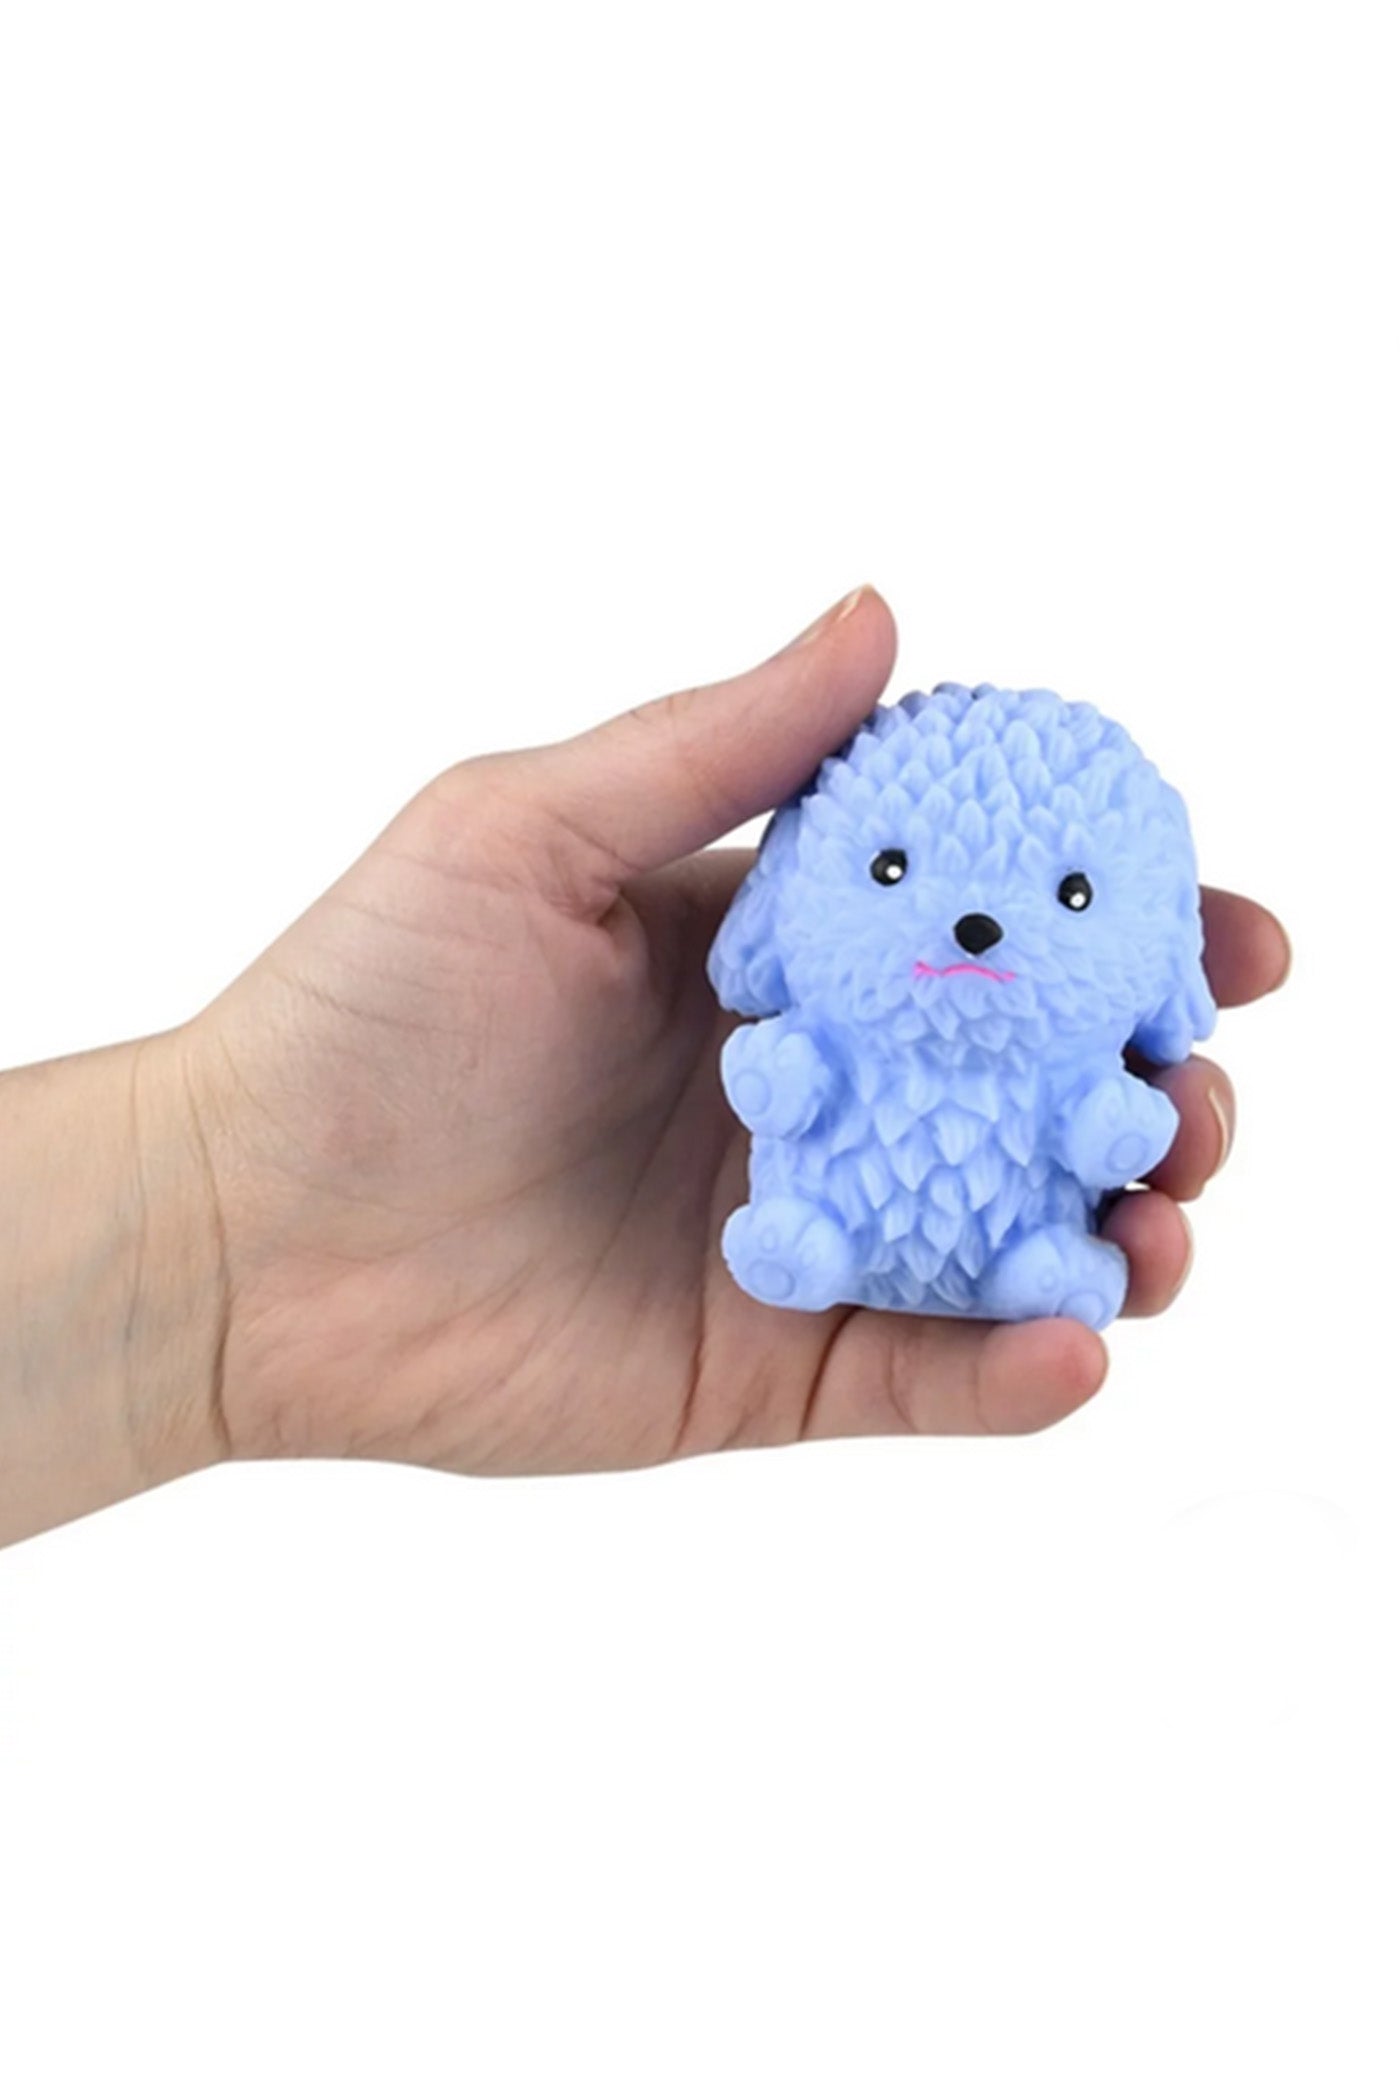 2" Squish And Squeeze Poodle Kids Toy